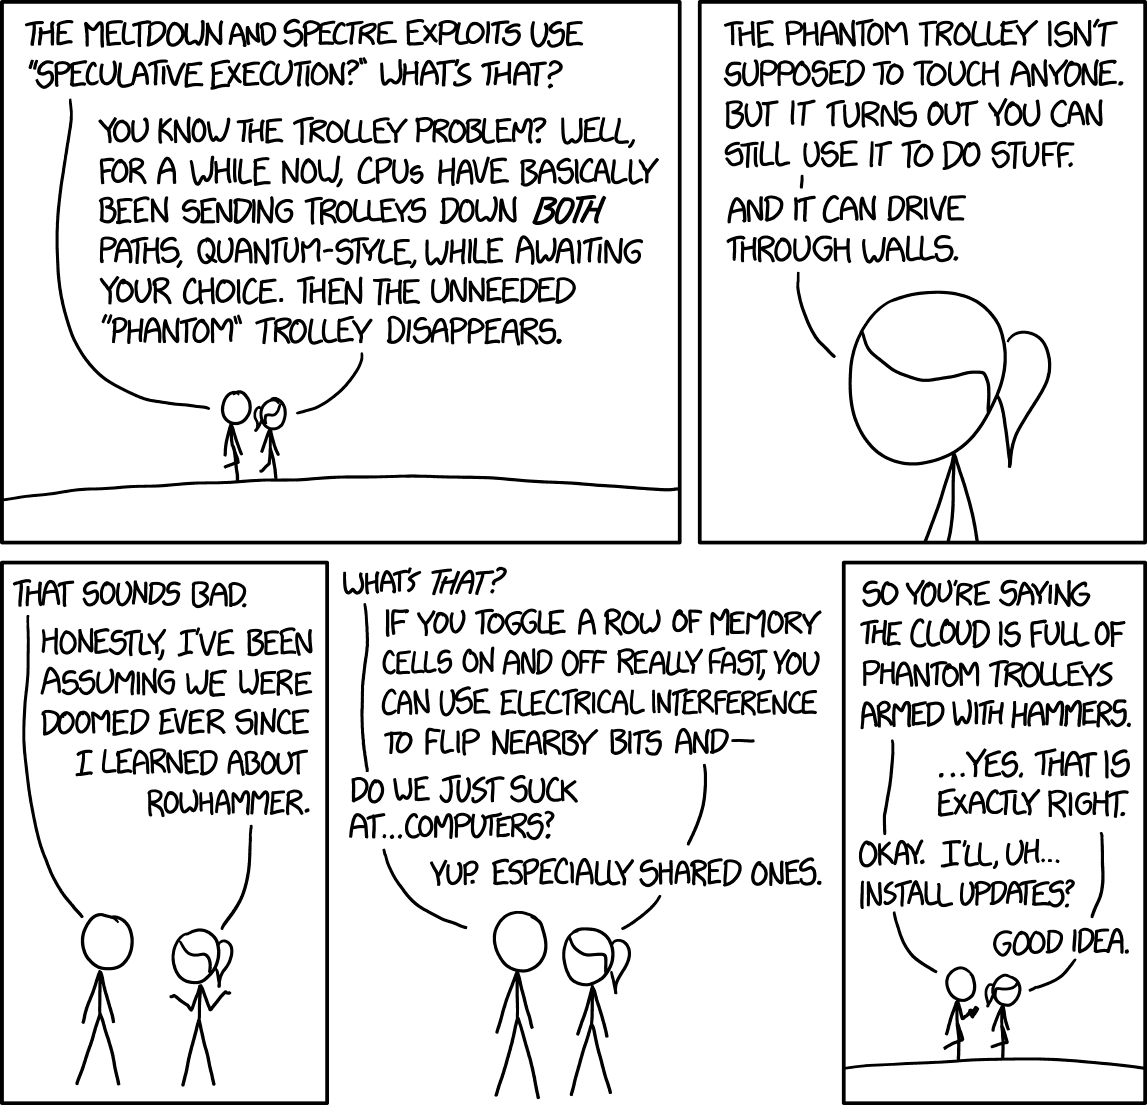 Cartoon about the Meltdown and Spectre vulnerabilities